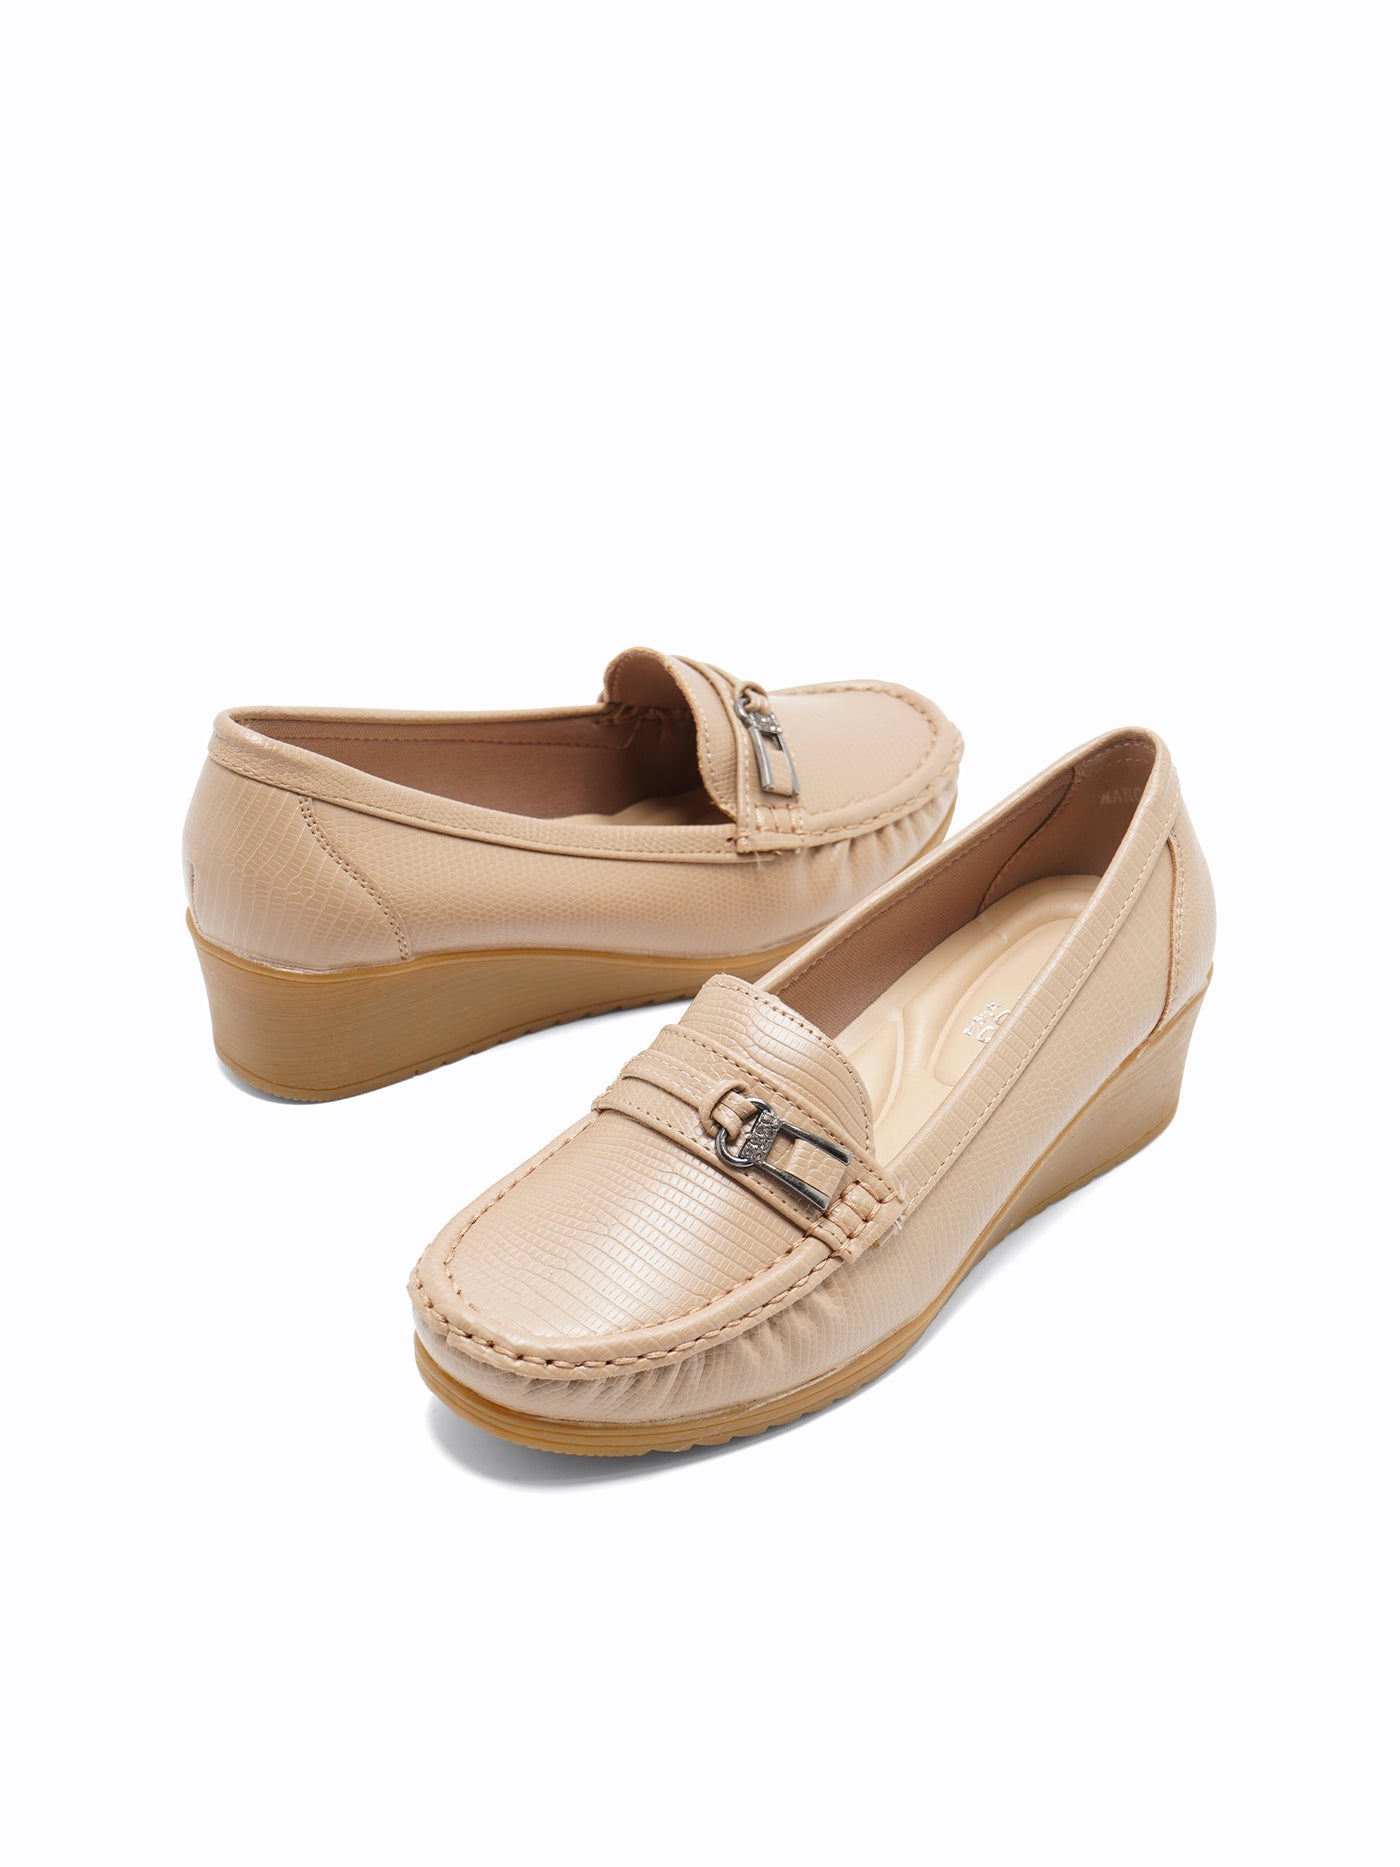 Margaux Wedge Loafers